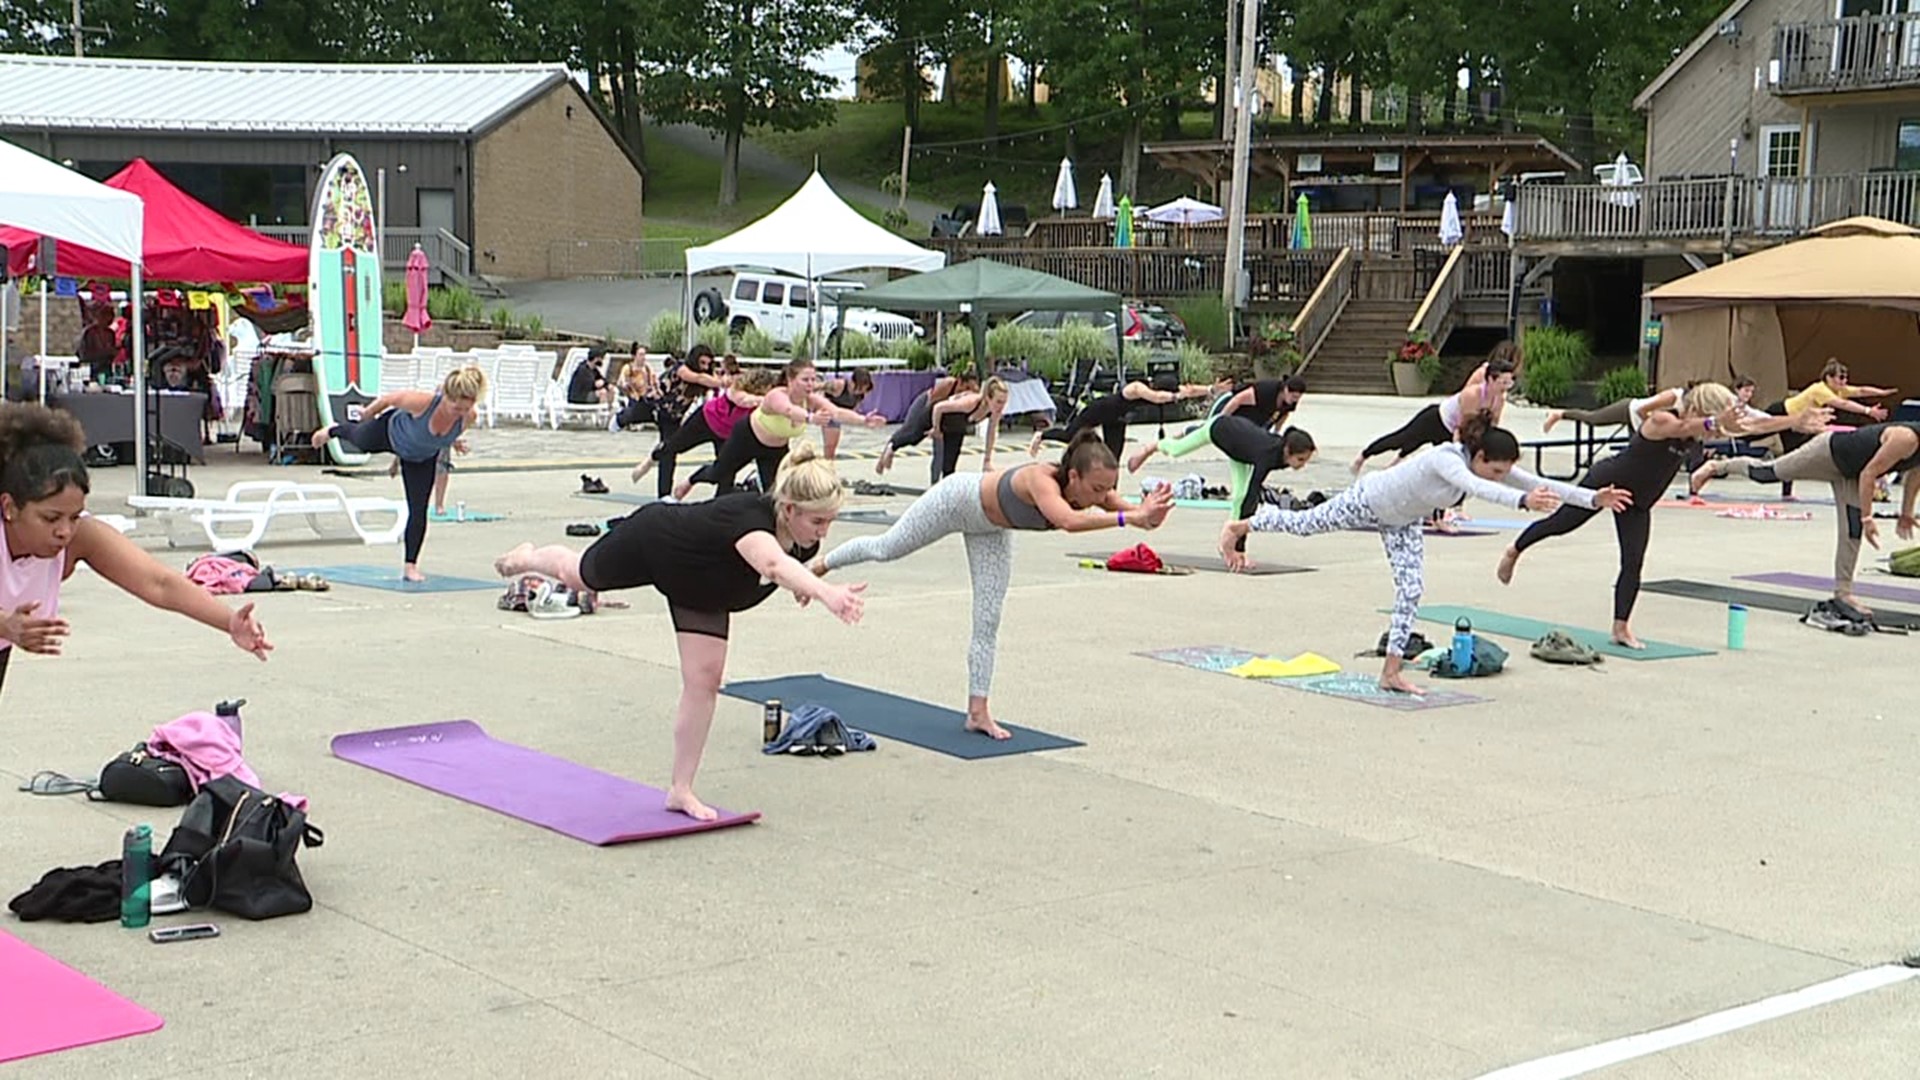 The festival was held at Montage Mountain in Moosic from 8 a.m. to 7 p.m. on Sunday.